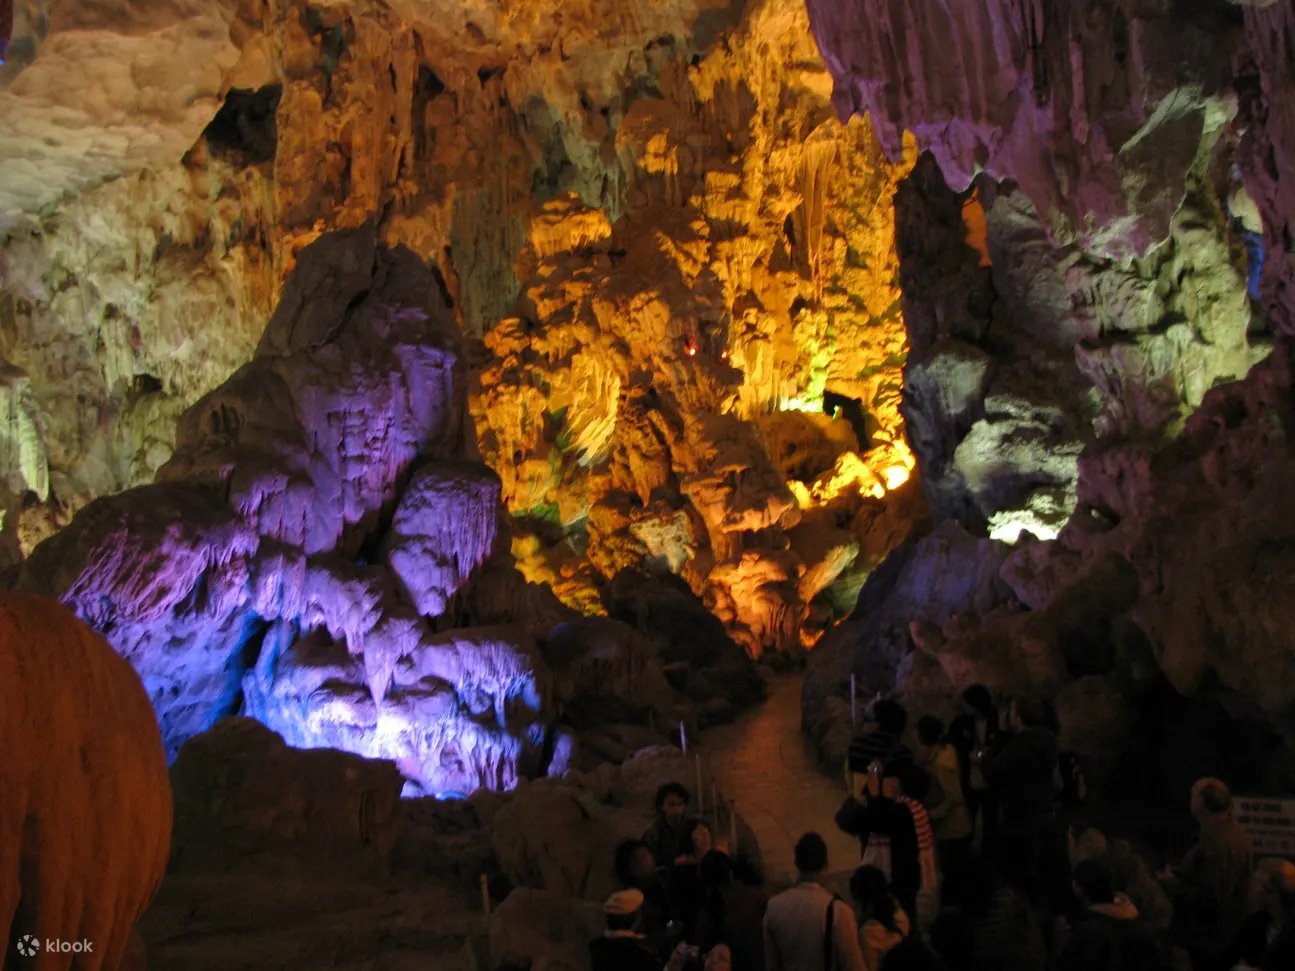 Thien Cung Cave at Ha Long Bay Day Tour by Cruise from Hanoi